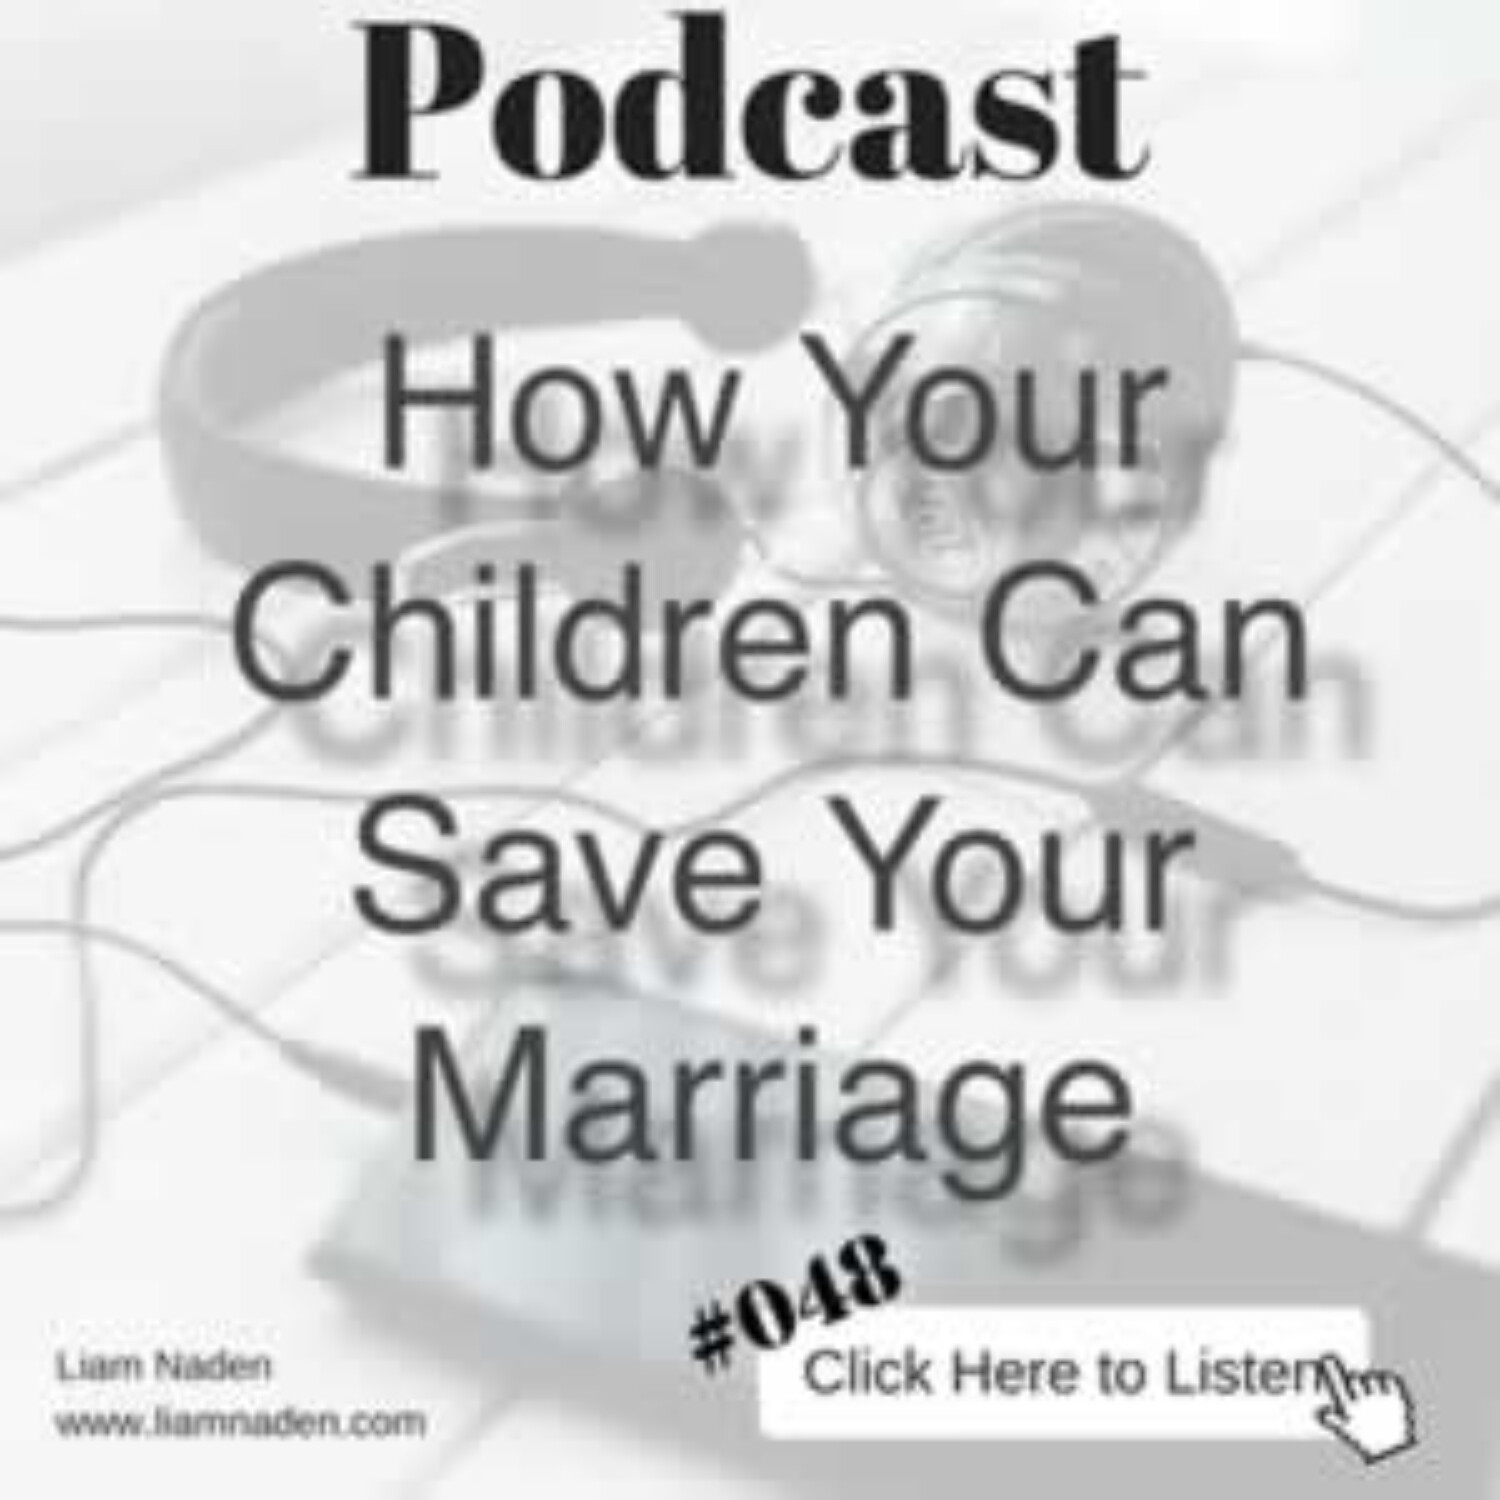 How Your Children can Save Your Marriage